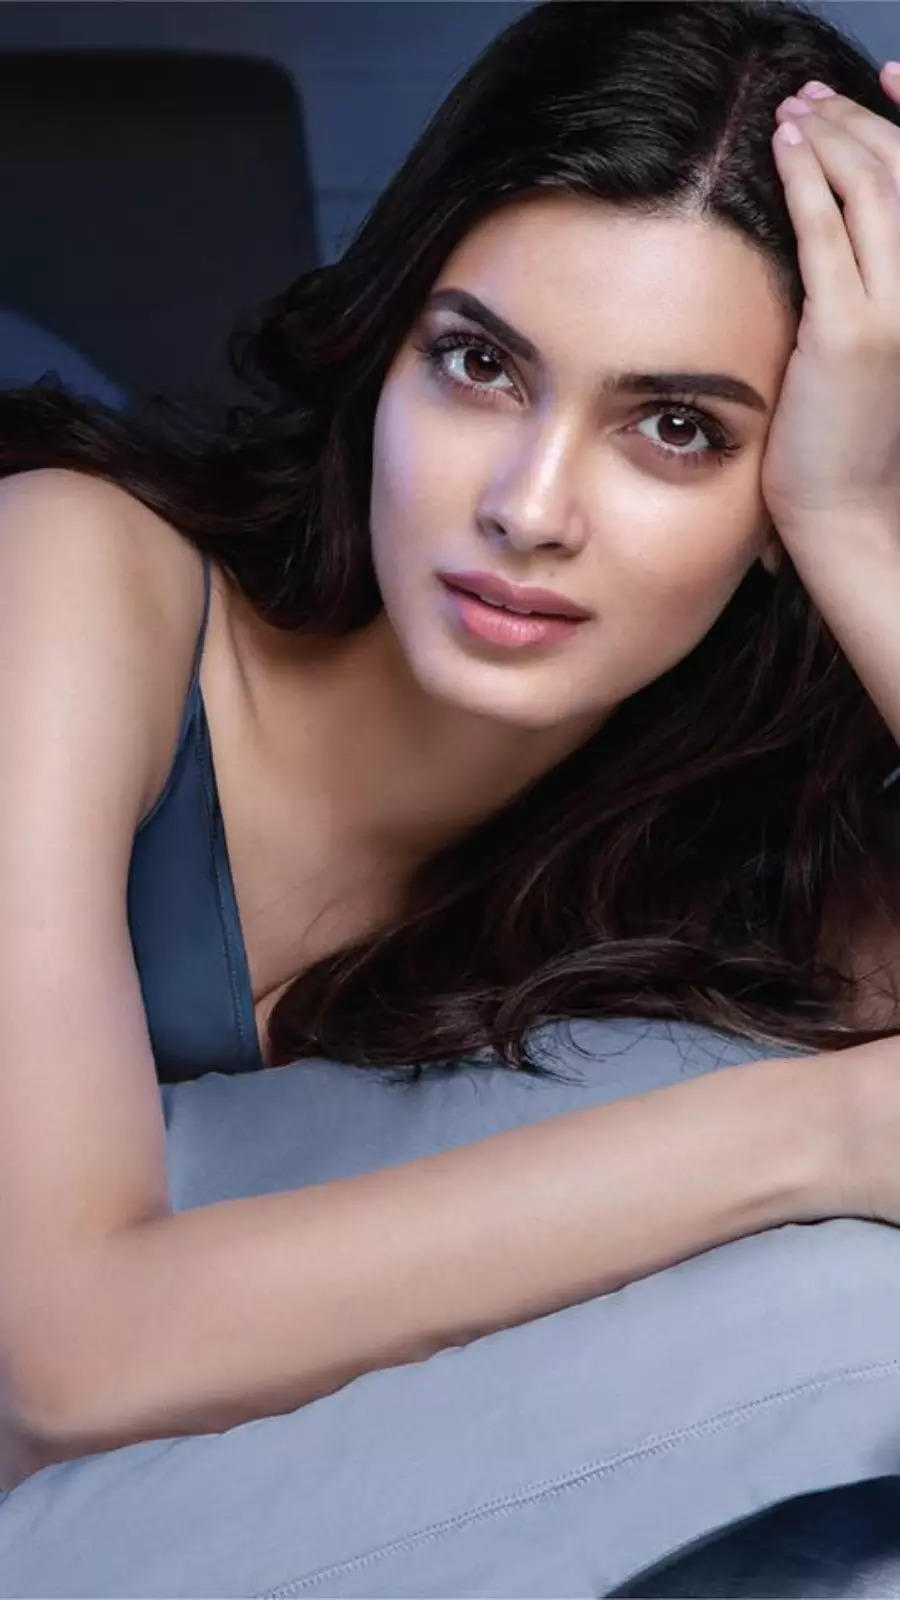 Summer skincare tips from Diana Penty | Times of India